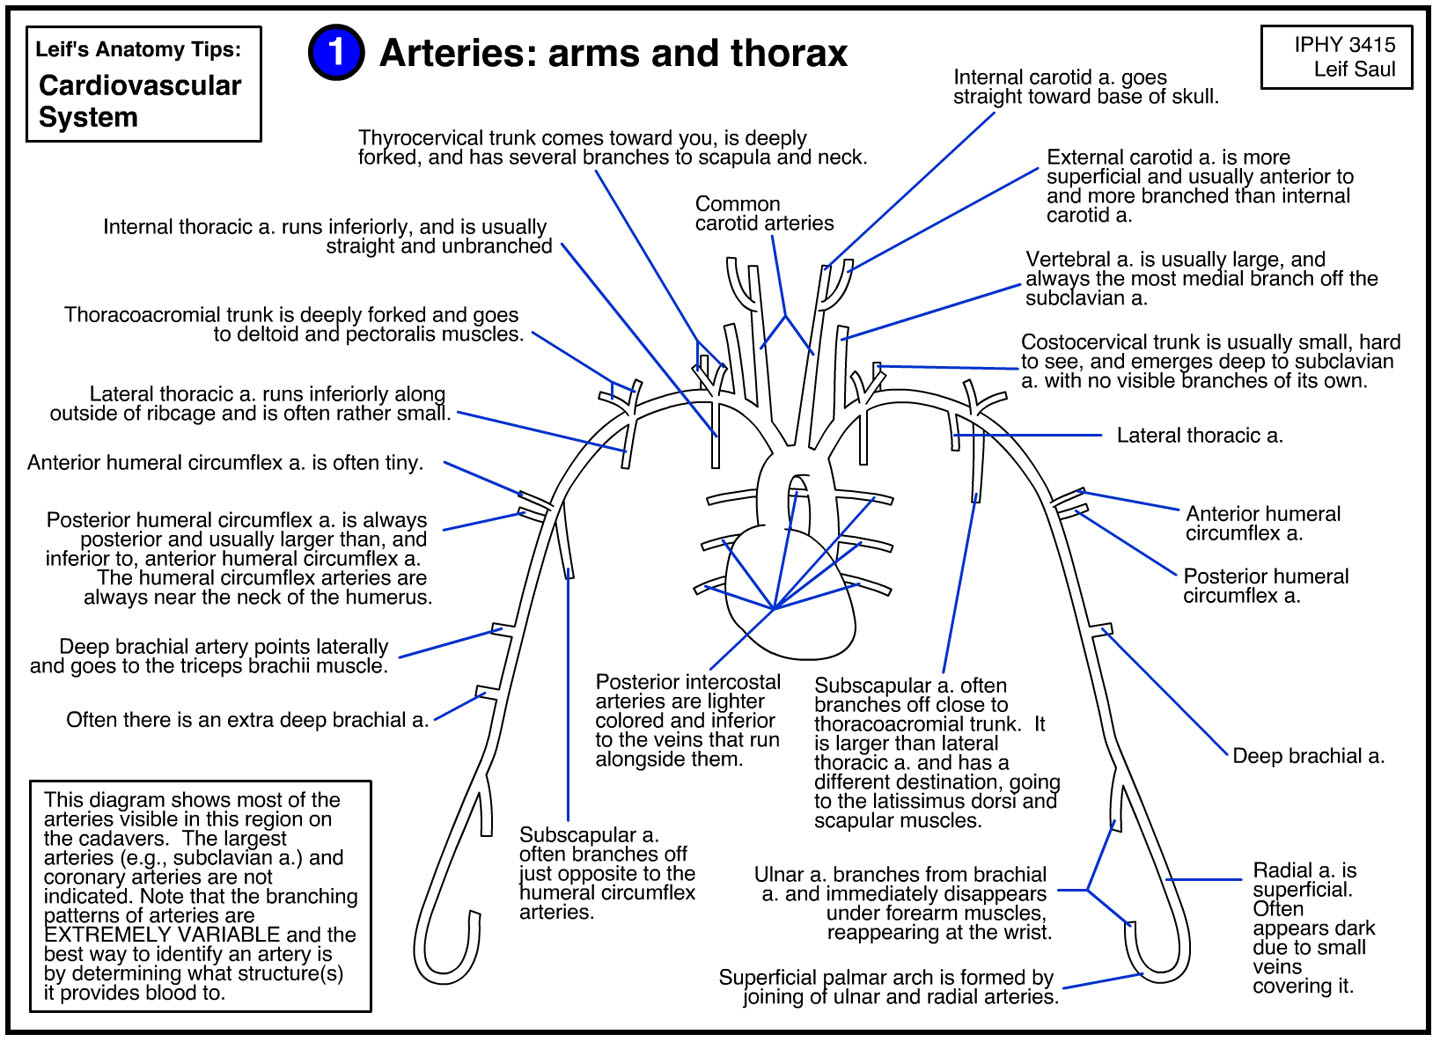 arteries of the arms and thorax